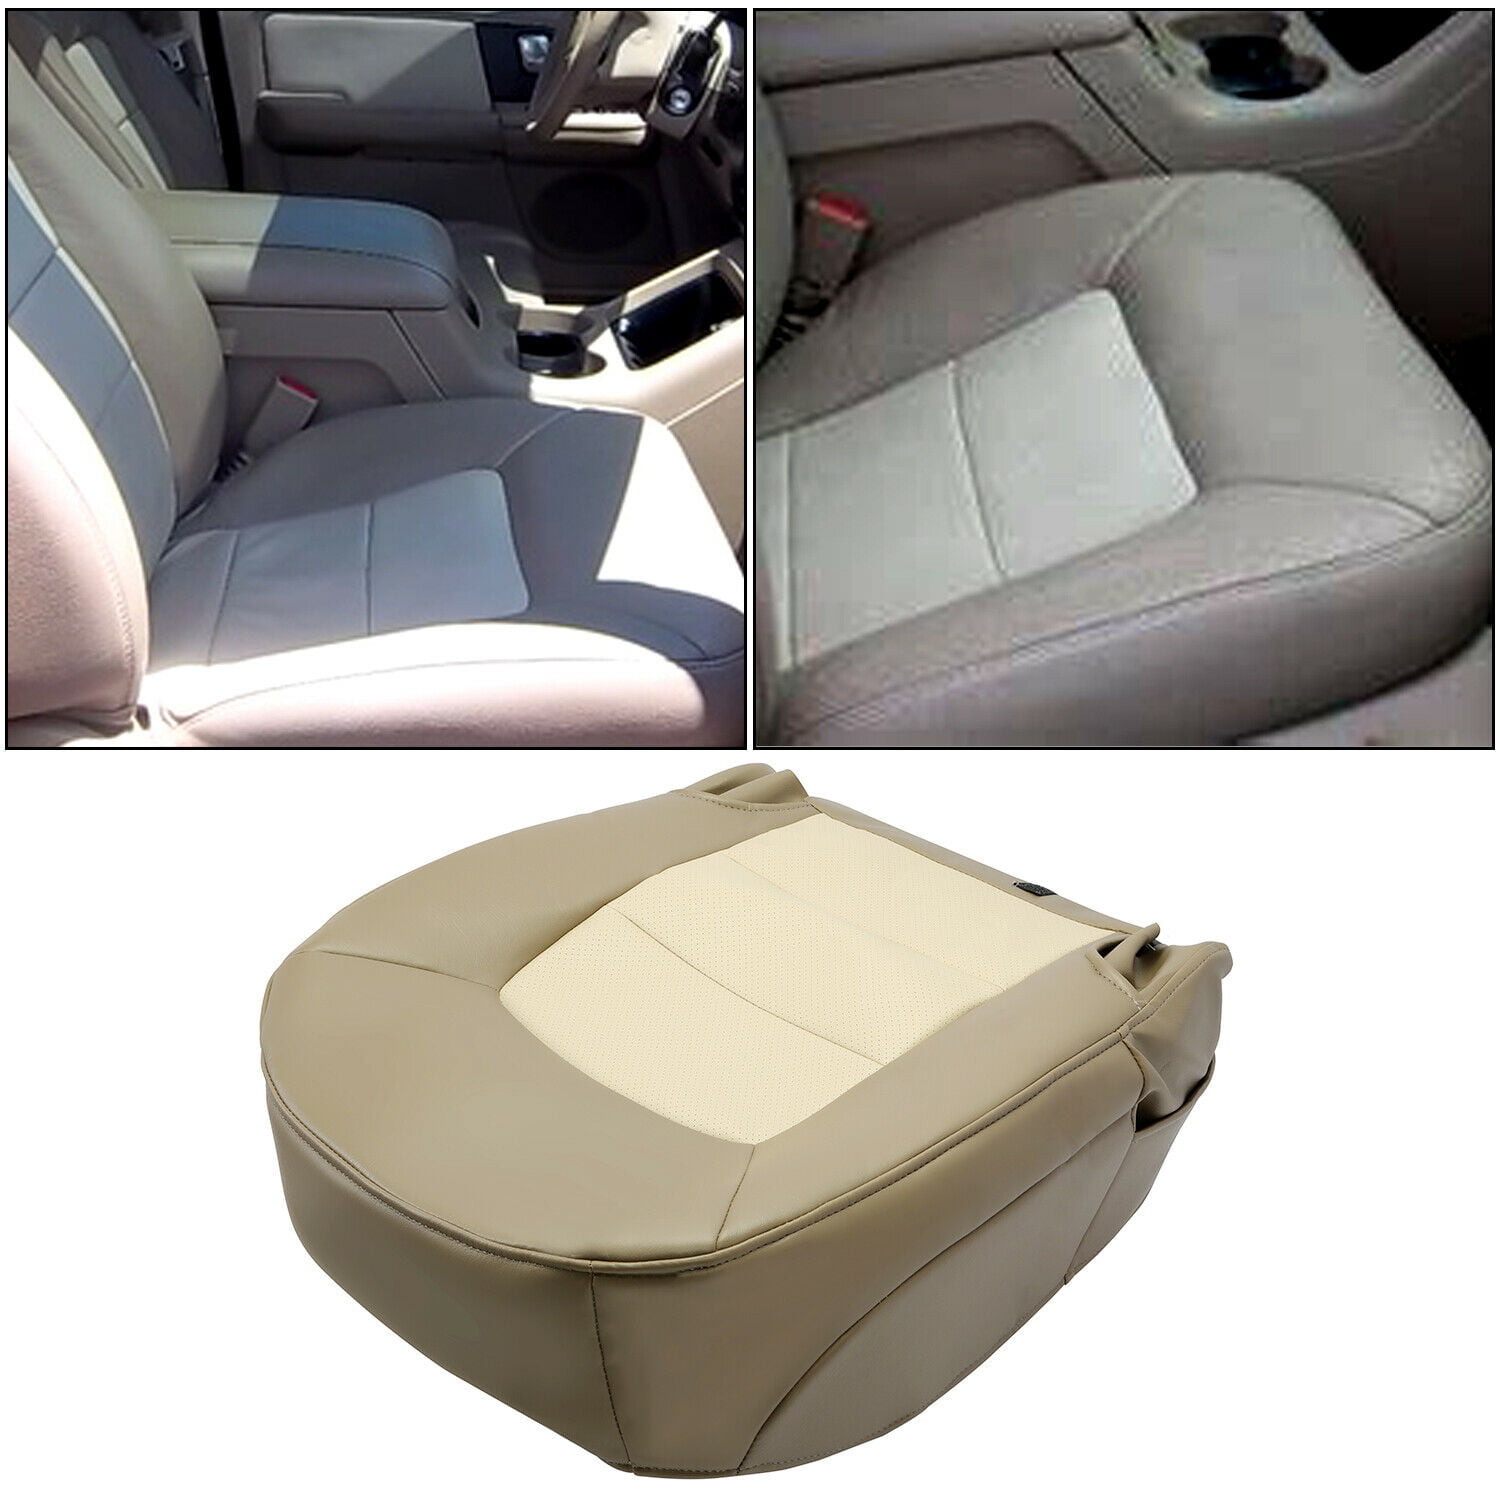 Air-Flow Seat Covers - Expedition Portal